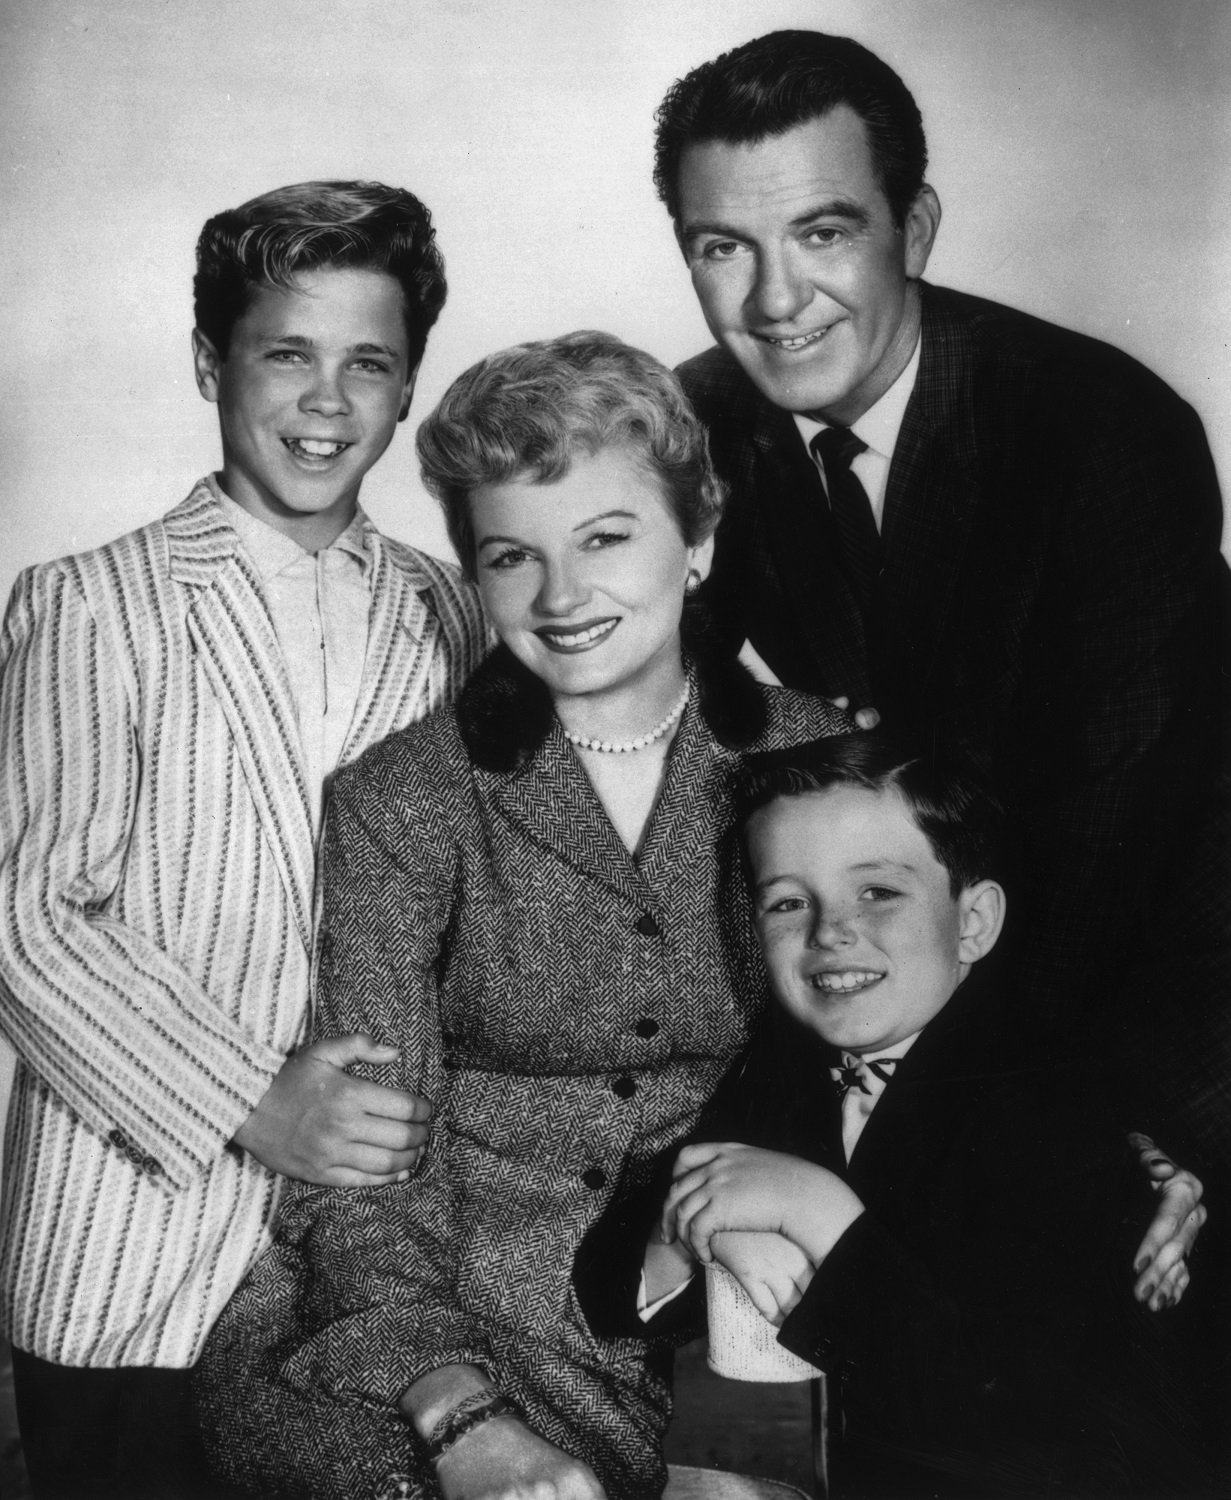 Tony Dow, Hugh Beaumont , Jerry Mathers and Barbara Billingsley